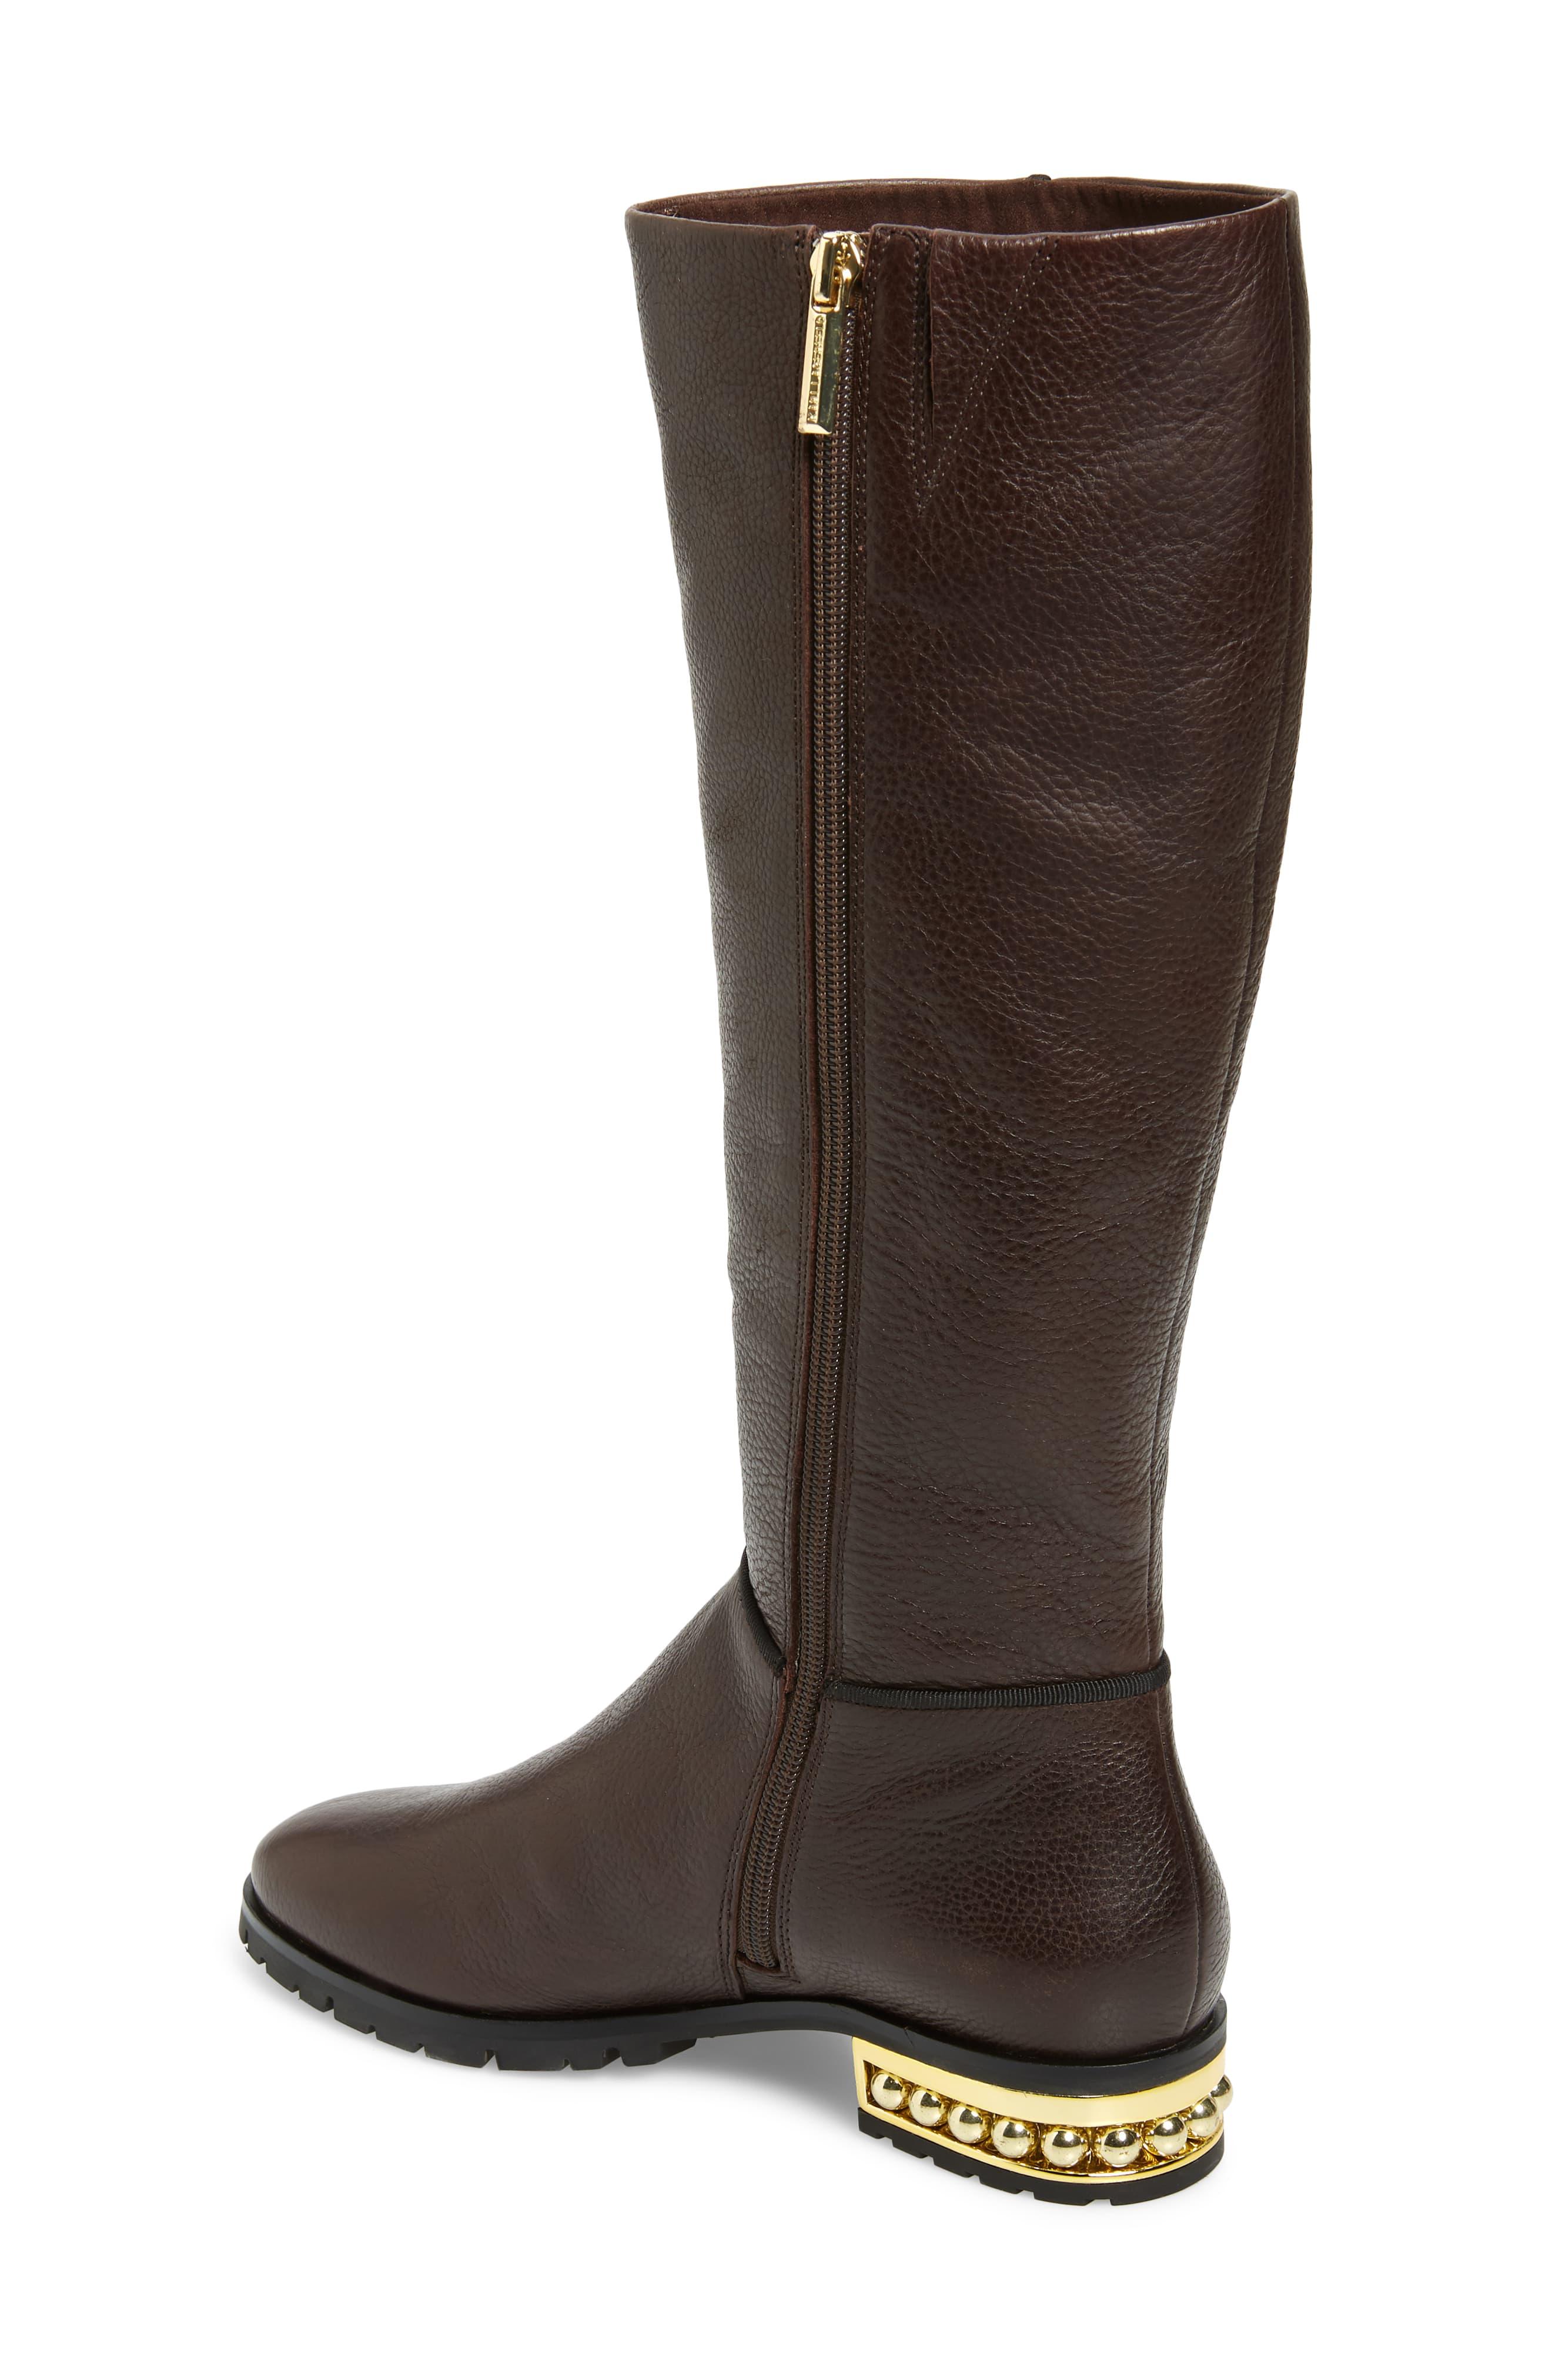 Karl Lagerfeld Leather Seine Knee High Boot in Coffee Leather (Brown ...